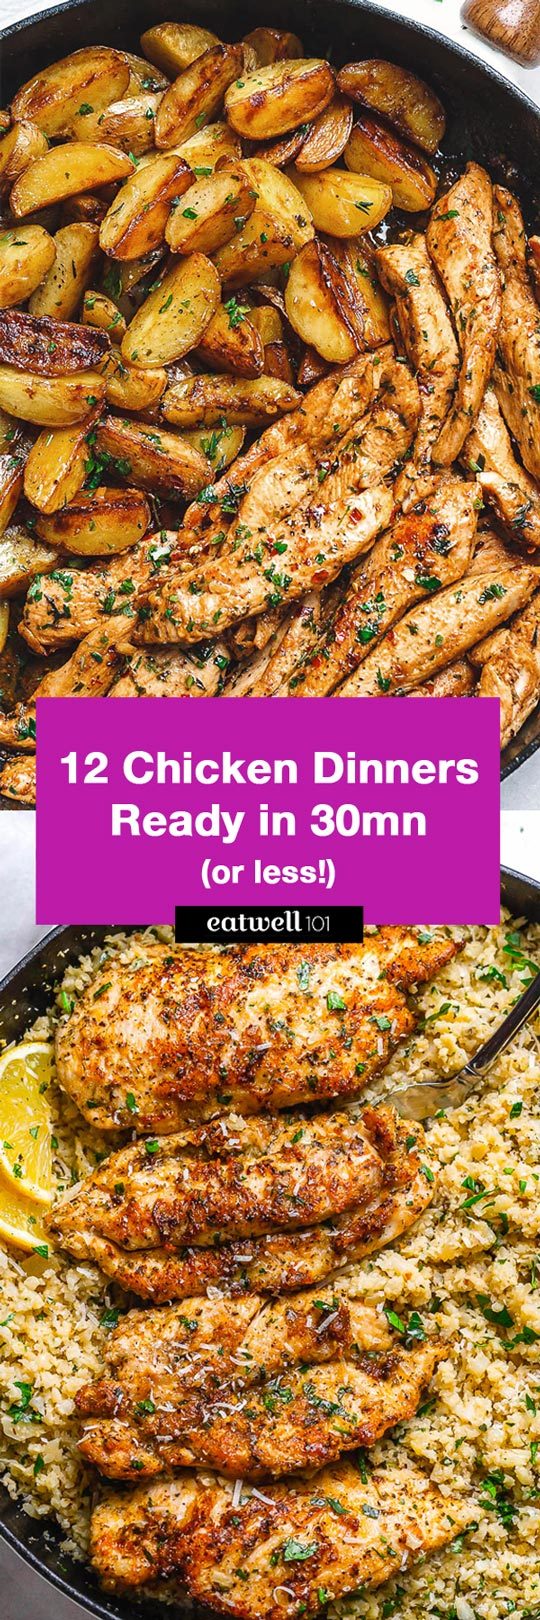 Chicken Dinner 12 Easy Chicken Recipes Ready In 30 Minute Or Less Eatwell101